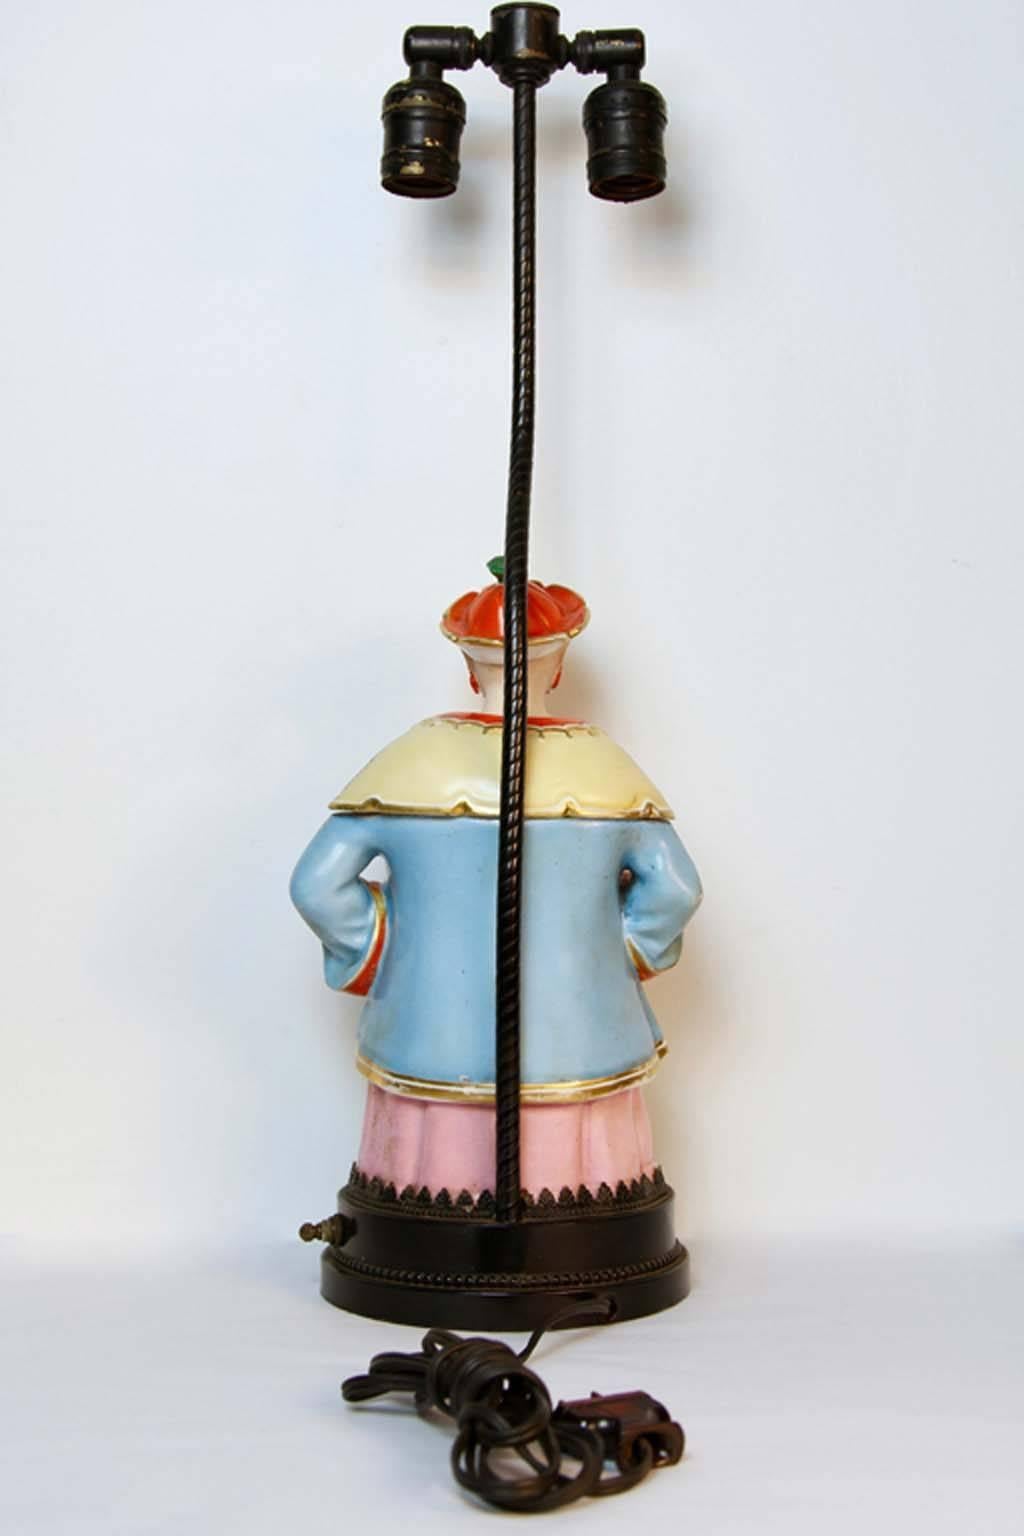 Porcelain Chinoiserie Figural Lamp, circa 1800s In Excellent Condition For Sale In Bridport, CT